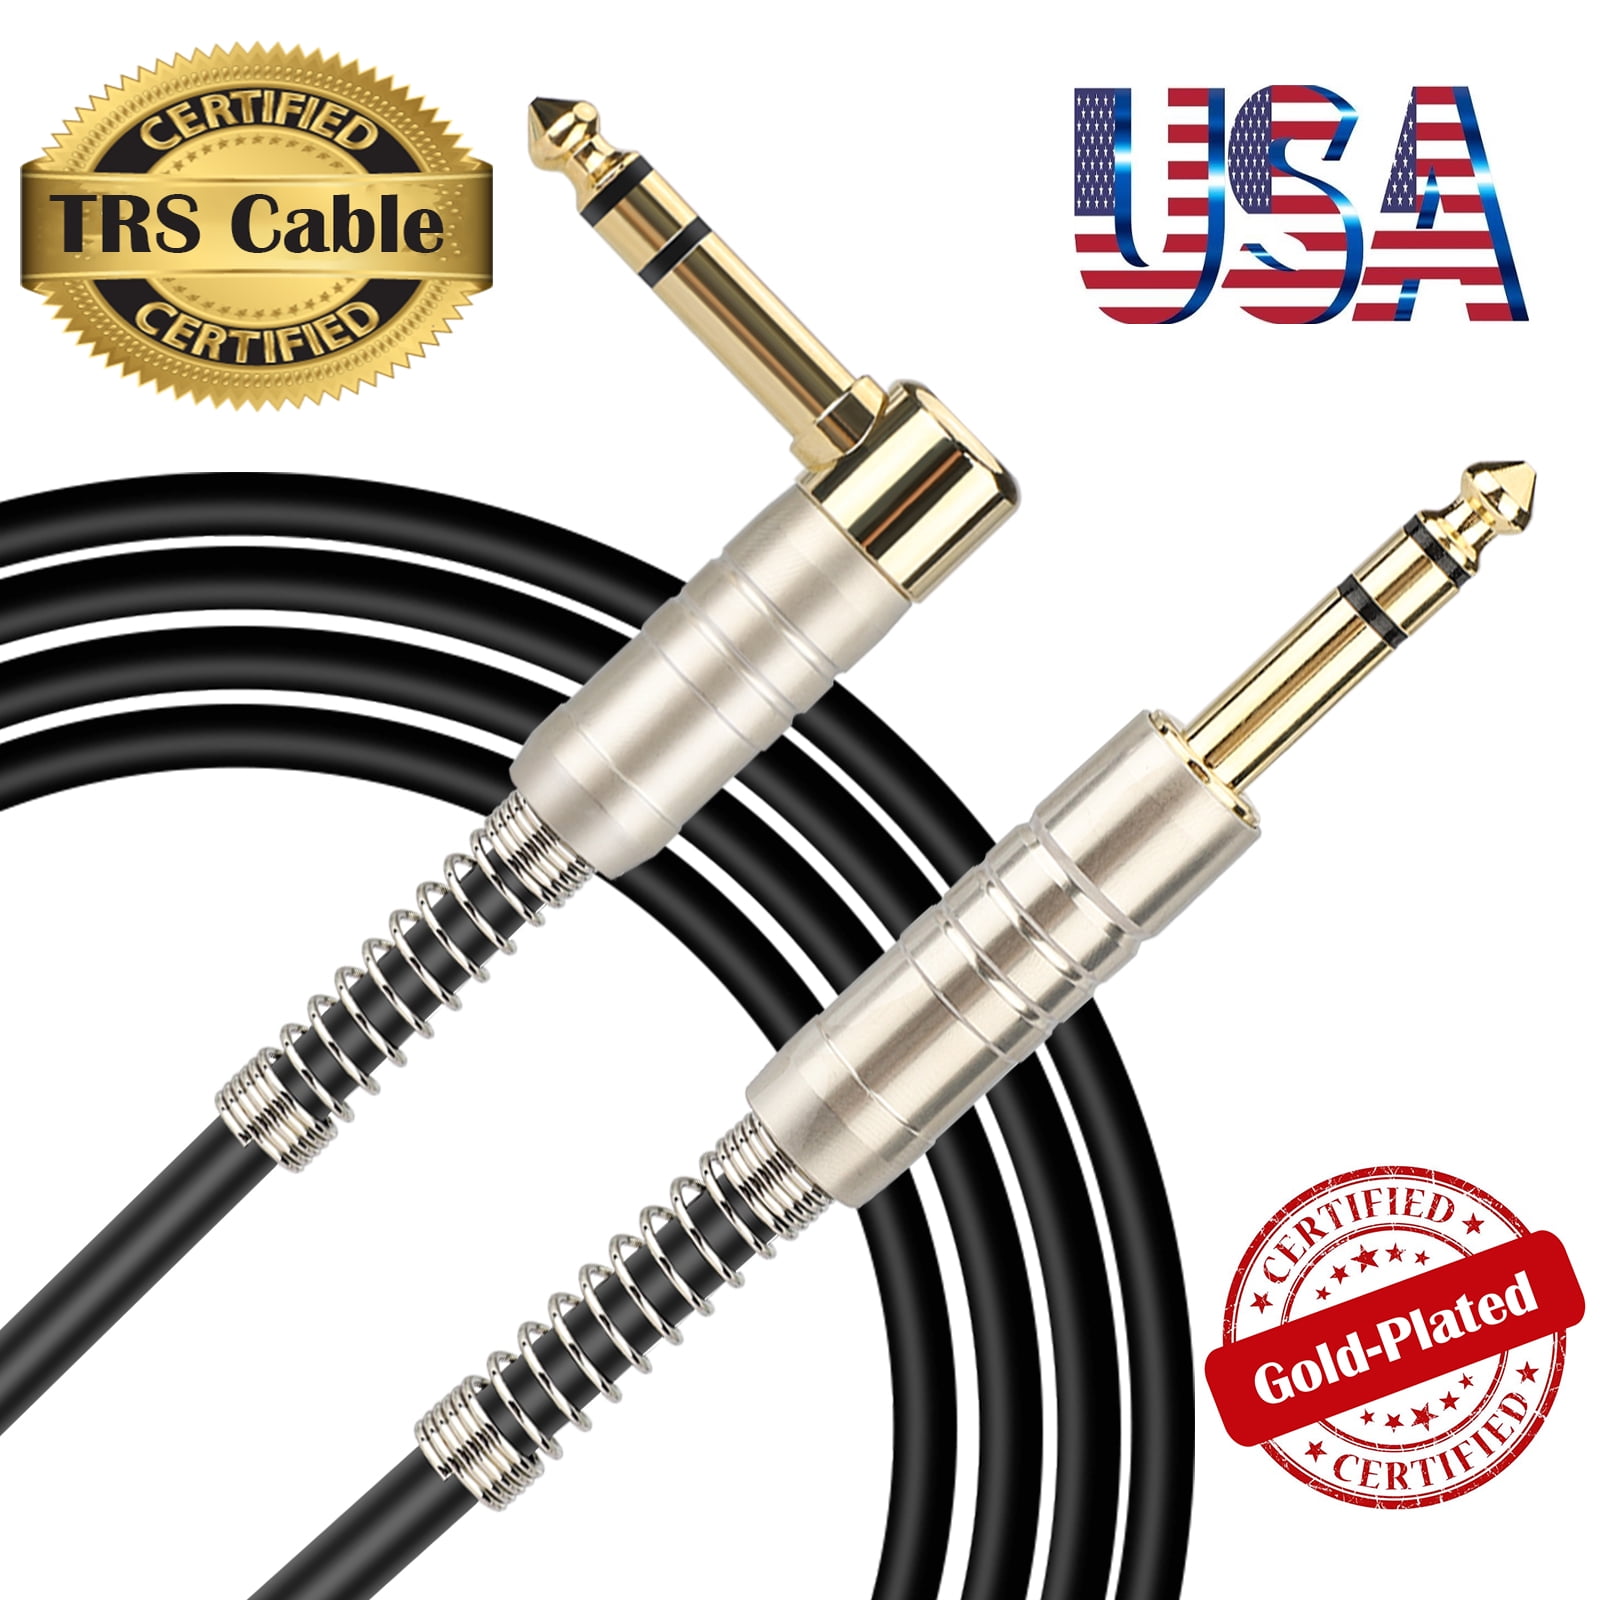 Gold Plated 3.5mm&6.5mm Stereo Adapter 9 Picks WMMM Right Angle 1/4 Inch TS to Straight 1/4 Inch TS Gold Plated 6.35mm Guitar Cord 2 Pack Electric Guitar Instrument Cable 10FT 